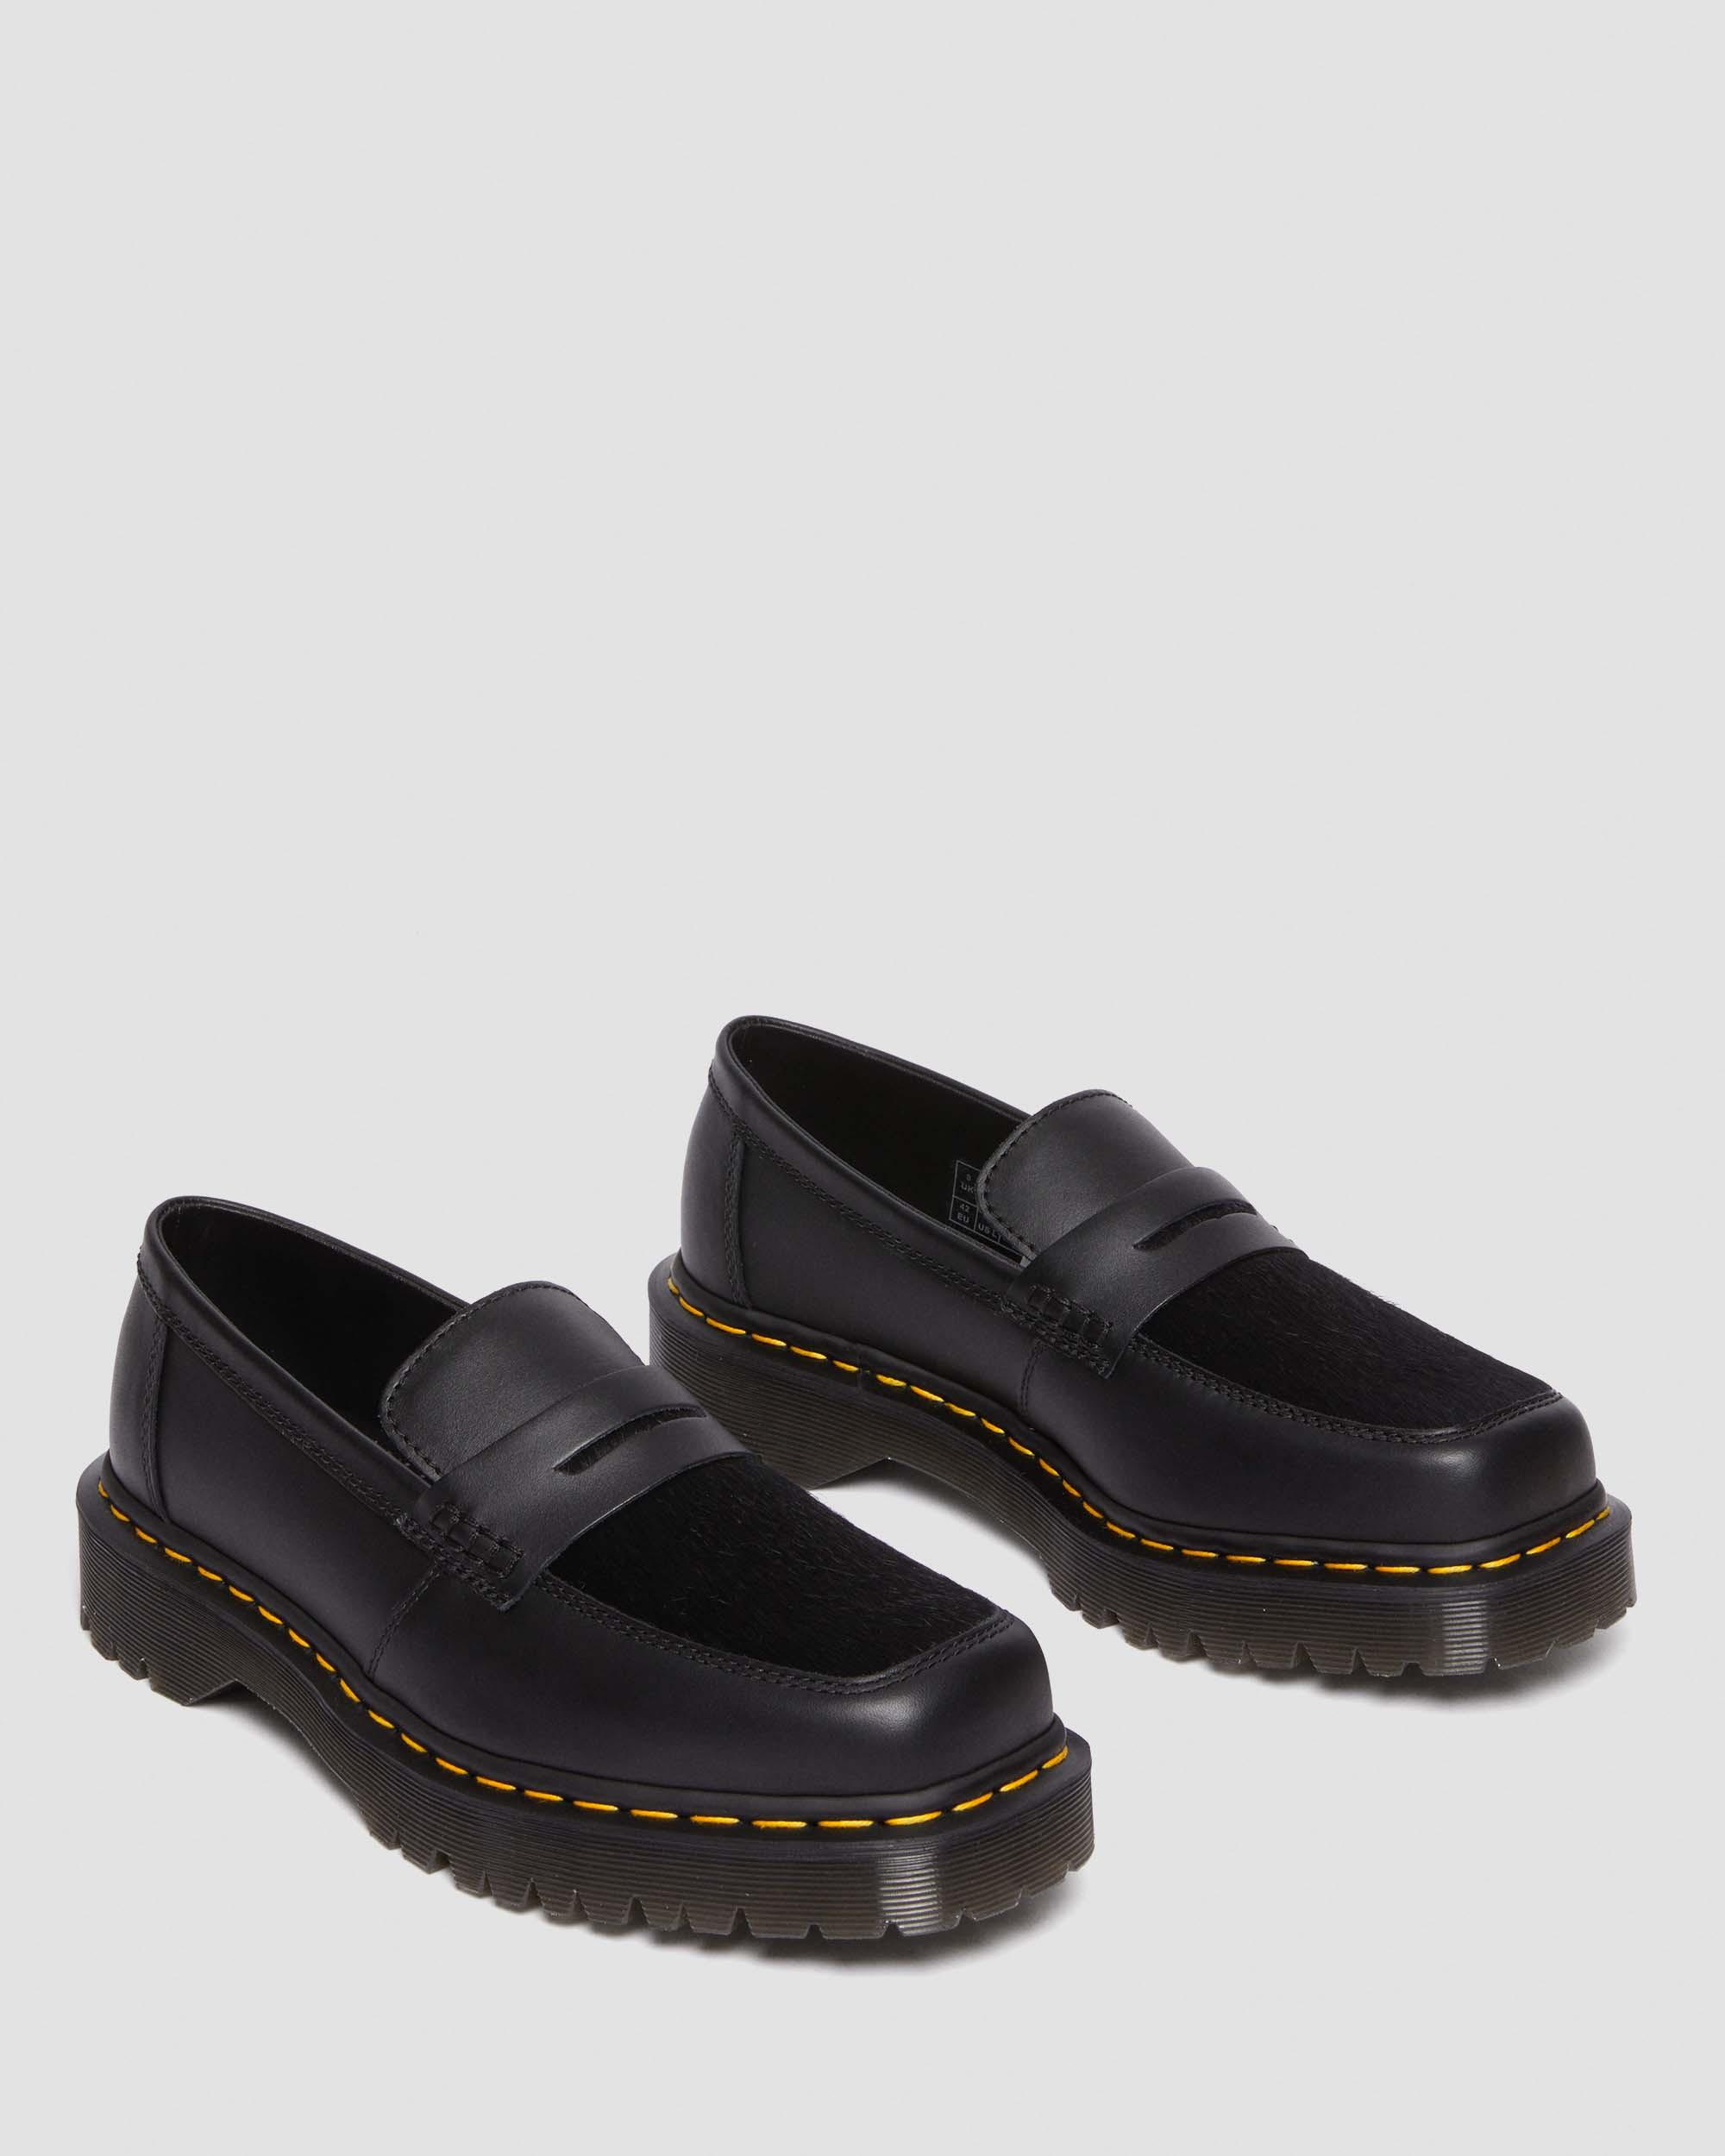 DR MARTENS Penton Bex Square Toe Hair-On & Leather Loafers